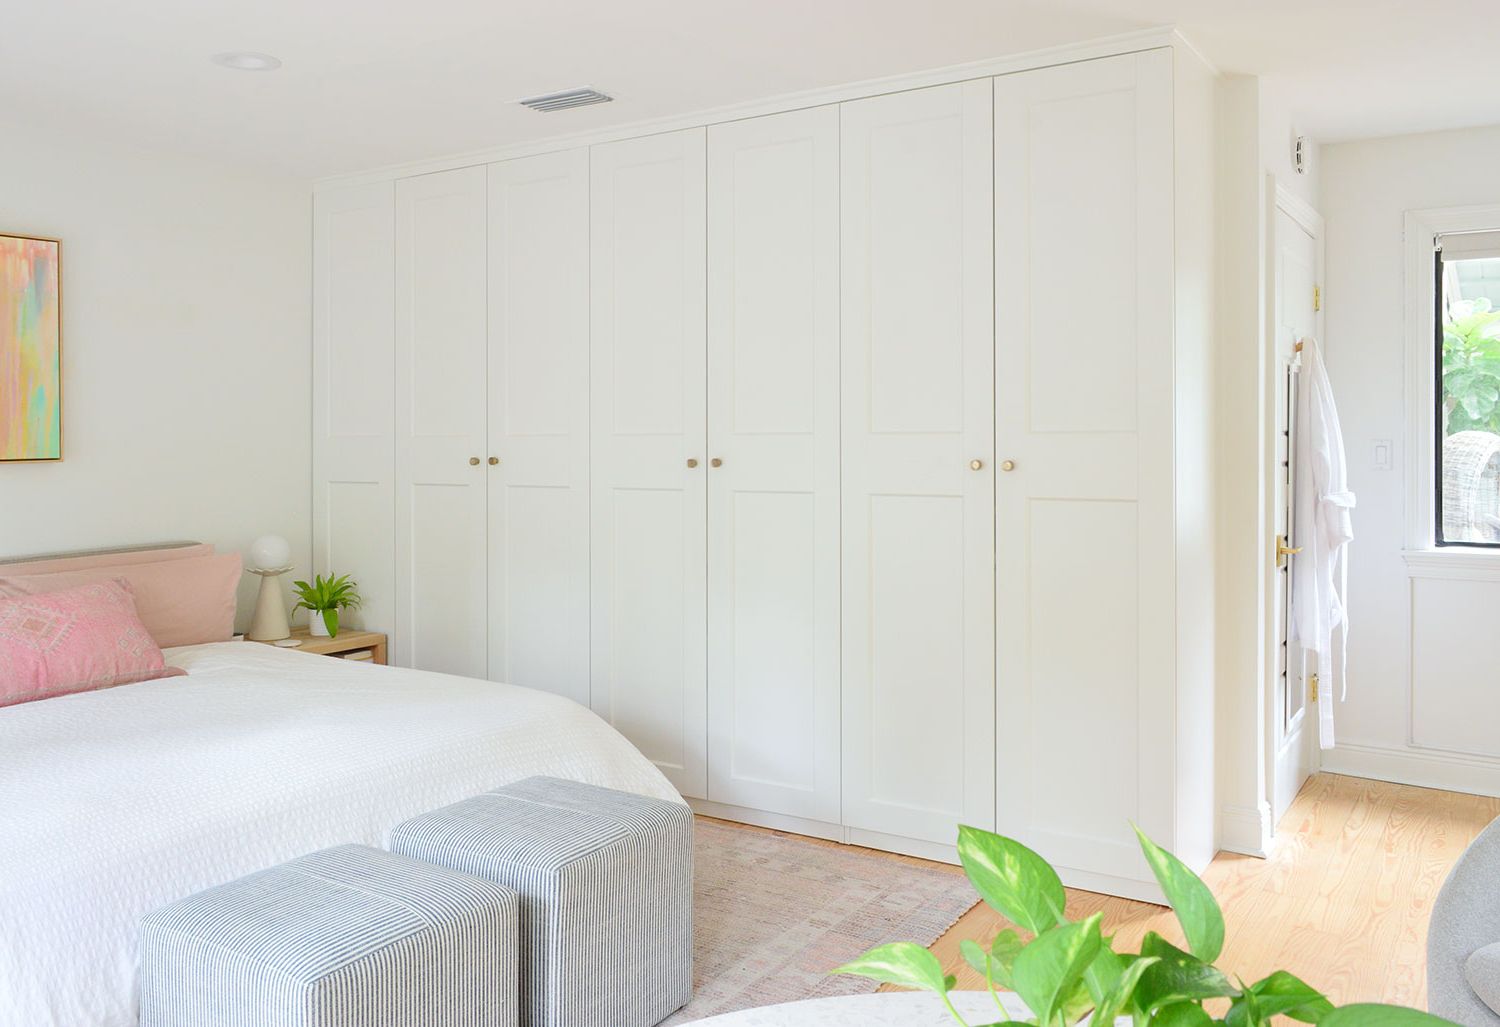 Making Ikea Pax Wardrobes Look Built In | Young House Love With Regard To French Built In Wardrobes (Gallery 16 of 20)